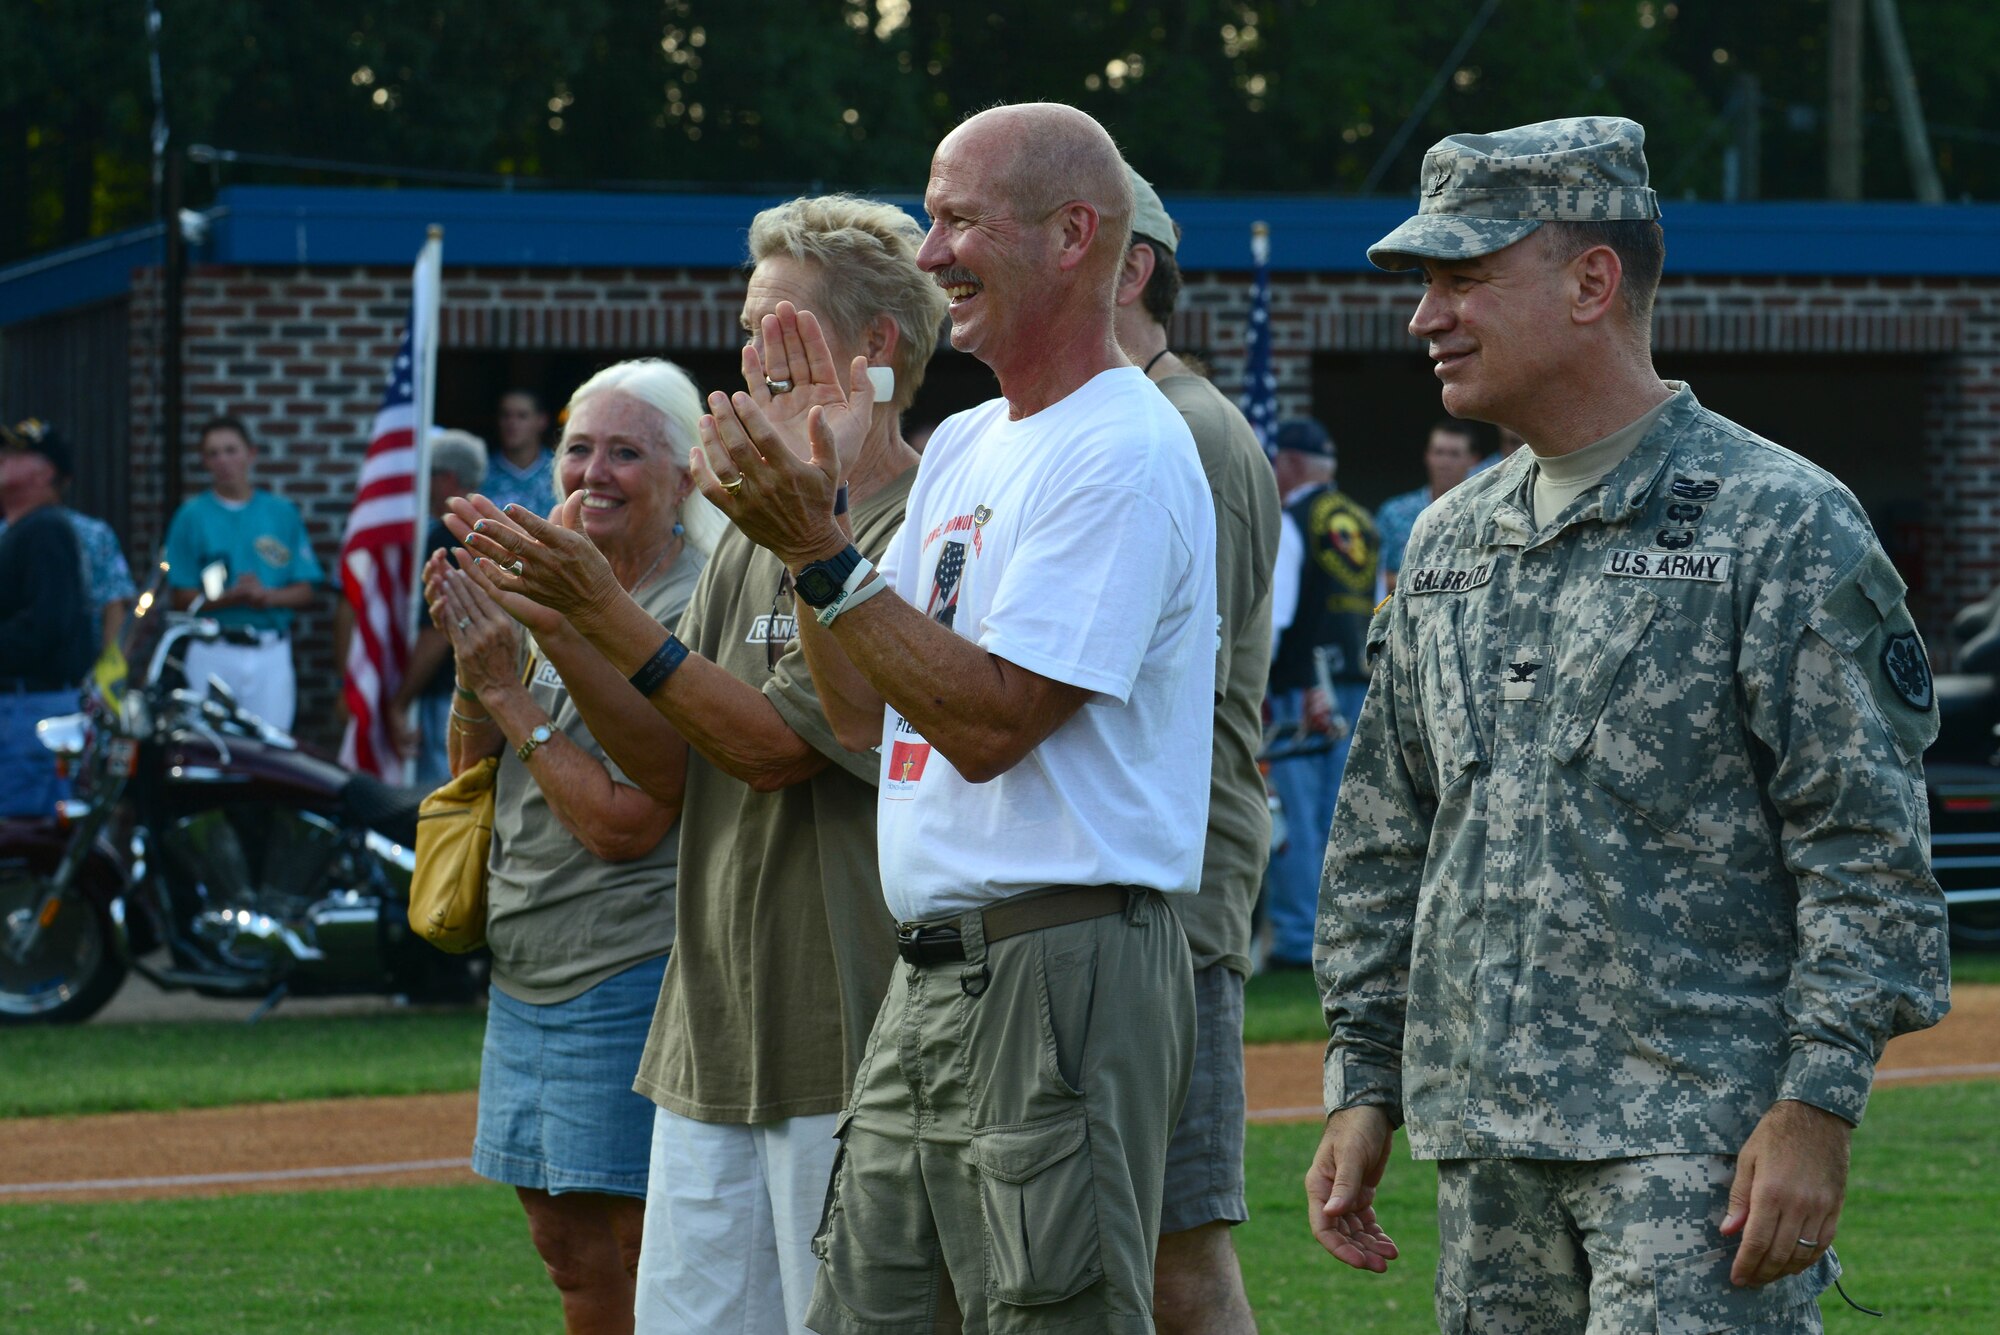 U.S. Army Col. William Galbraith, 733rd Mission Support Group commander, stands on the field of War Memorial stadium with Gold Star Family members during the Peninsula Pilot baseball team’s 2nd Annual Gold Star Family Appreciation Night in Hampton, Va., July 23, 2014. More than 50 family members attended the event which celebrated the lives of their deceased Service members. (U.S. Air Force photo by Airman 1st Class Kimberly Nagle/Released)